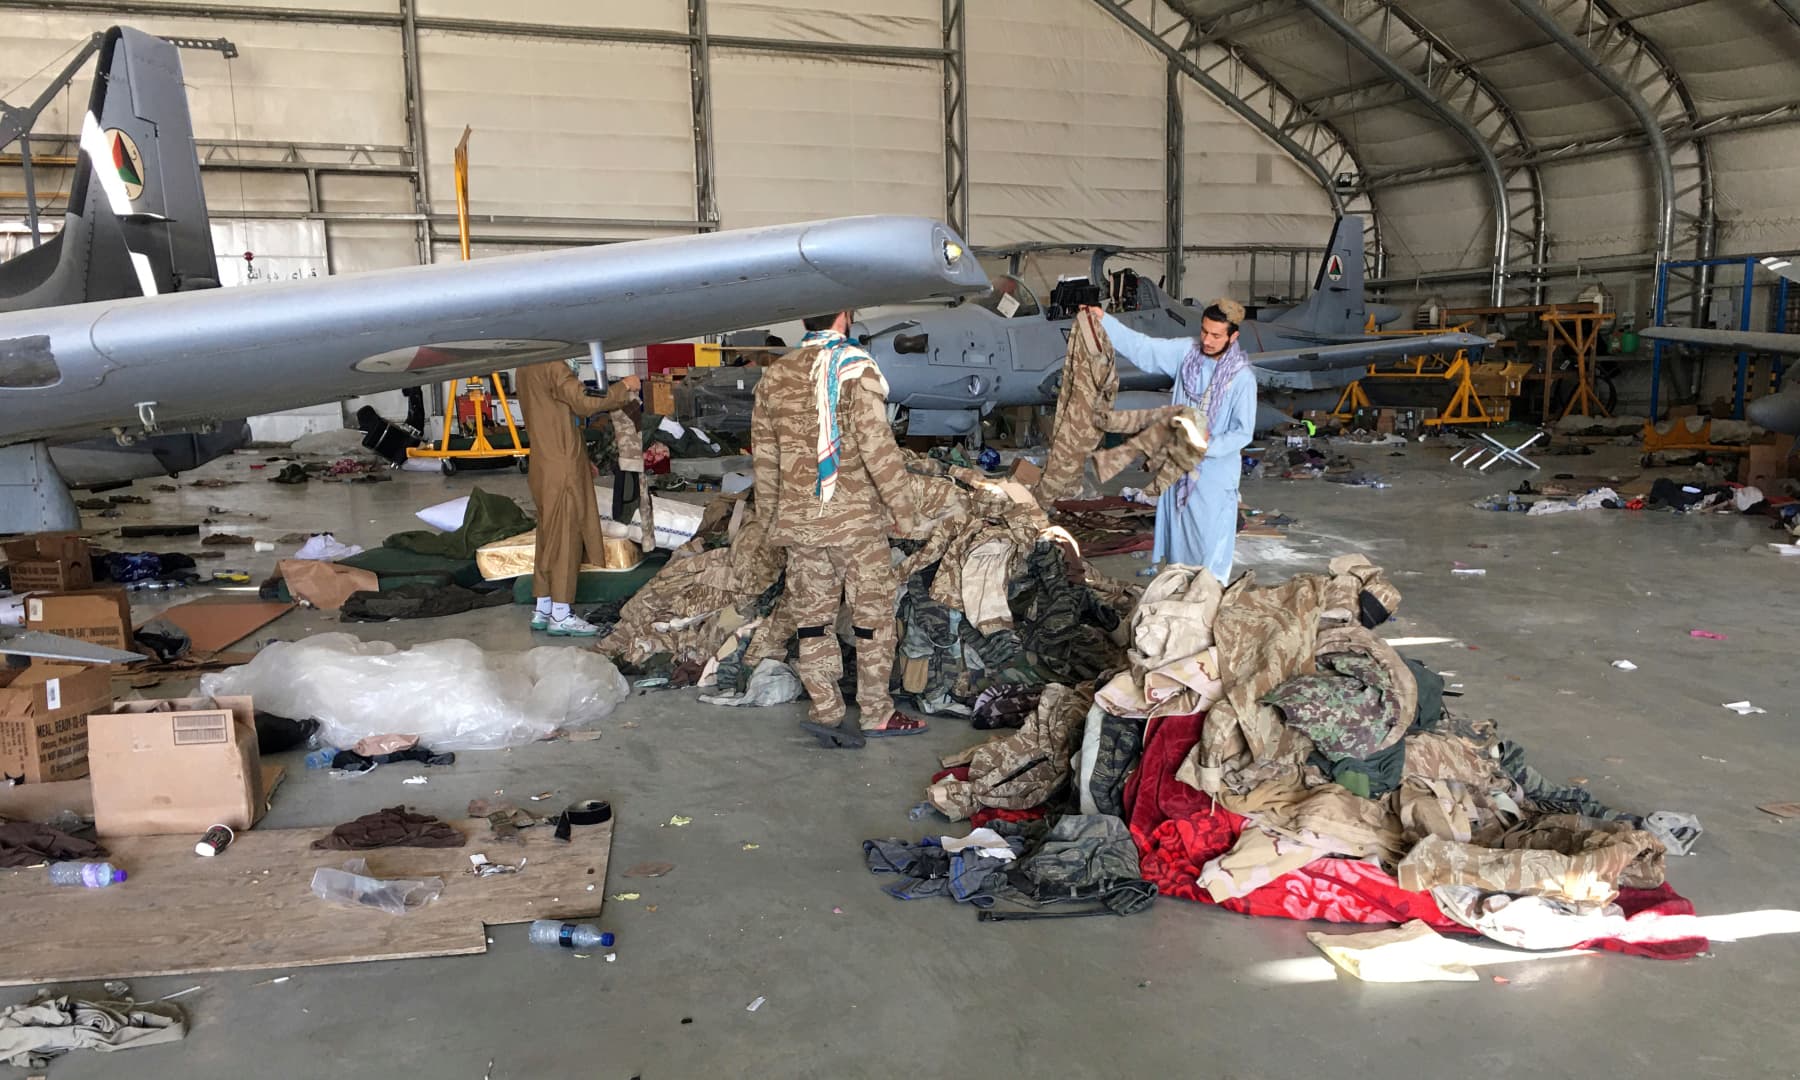 Taliban fighters collect military clothes near damaged Afghan military aircraft after the Taliban's takeover inside the Hamid Karzai International Airport in Kabul, Afghanistan on September 5, 2021. — AP